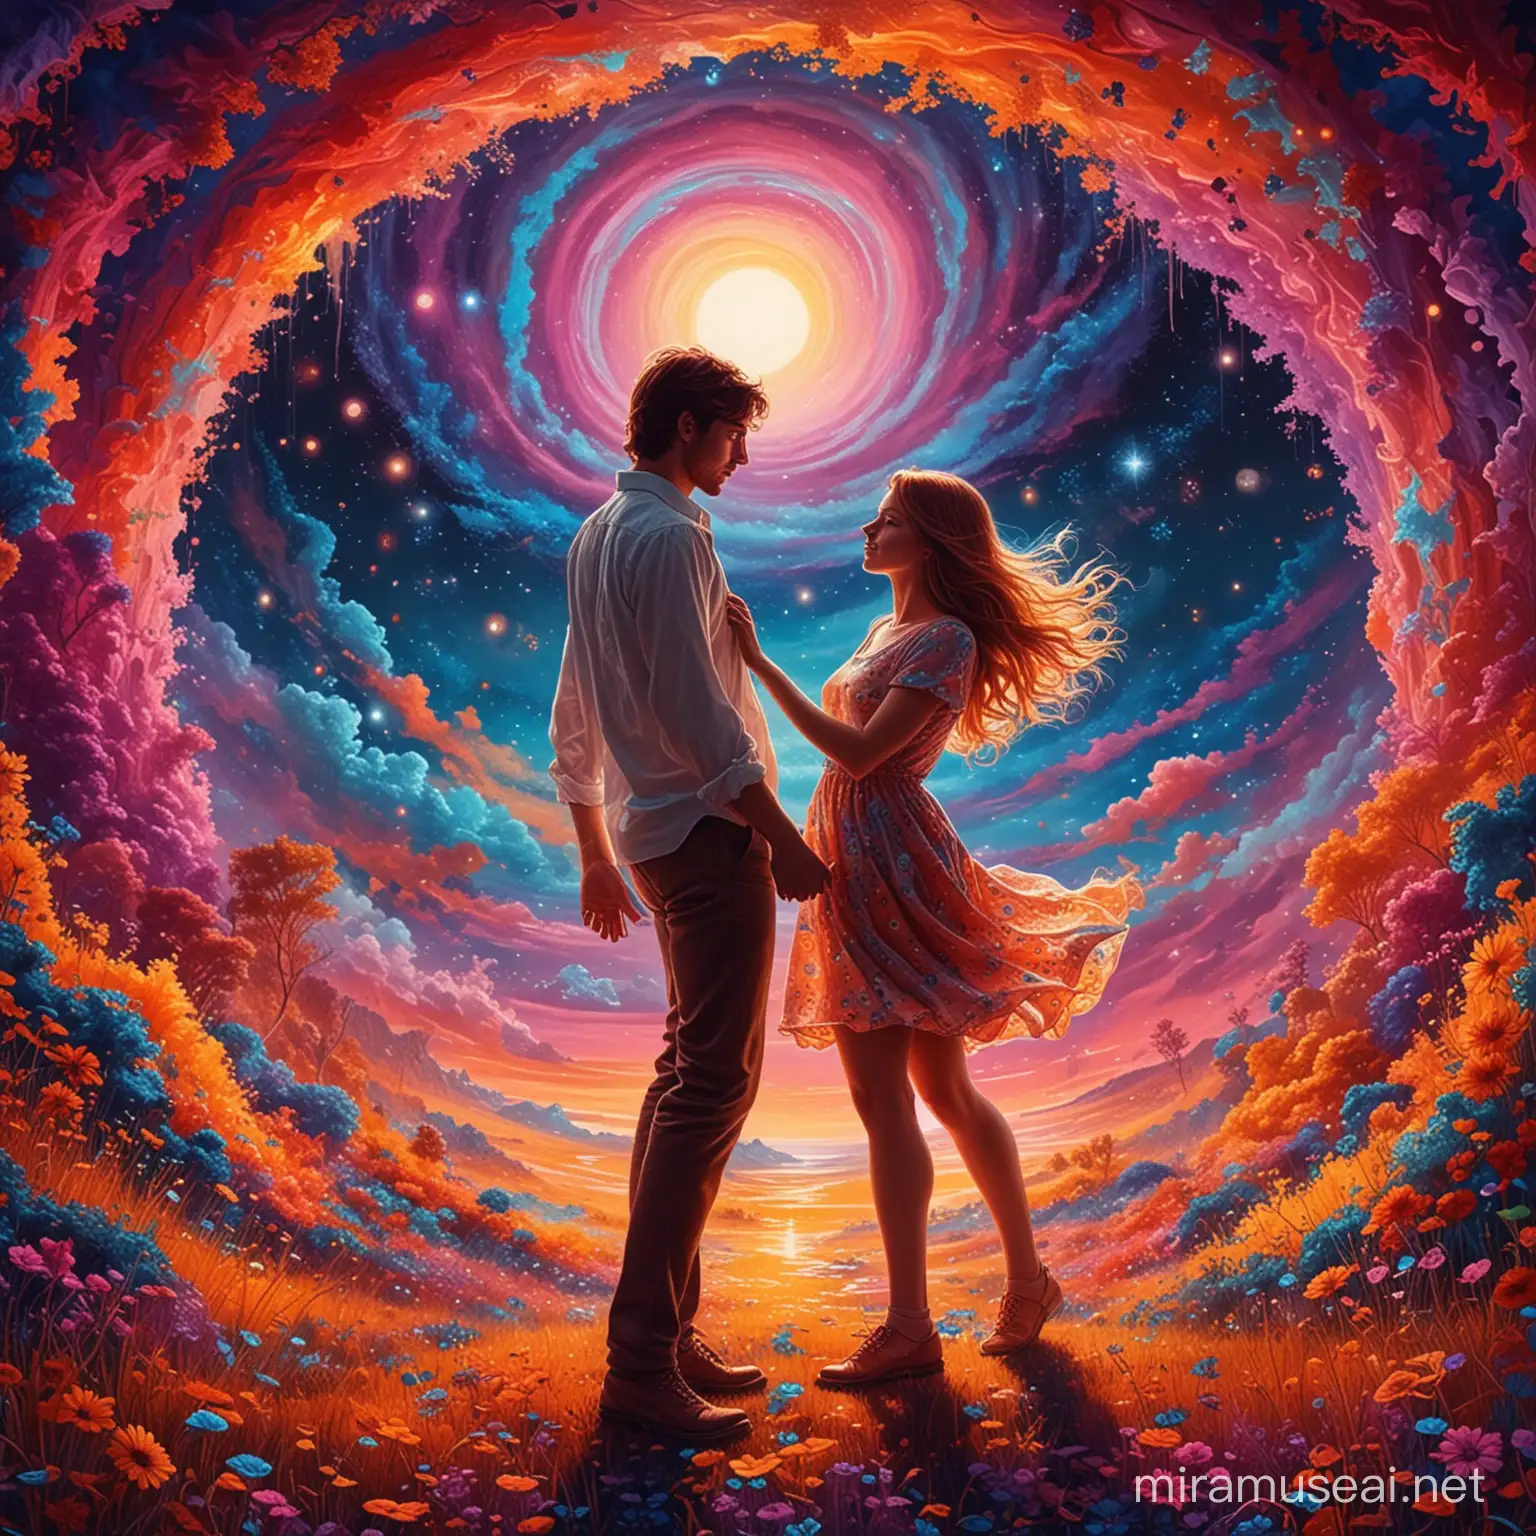 Dream dance, boy and girl, romatic setting, wild colors, psychedelic